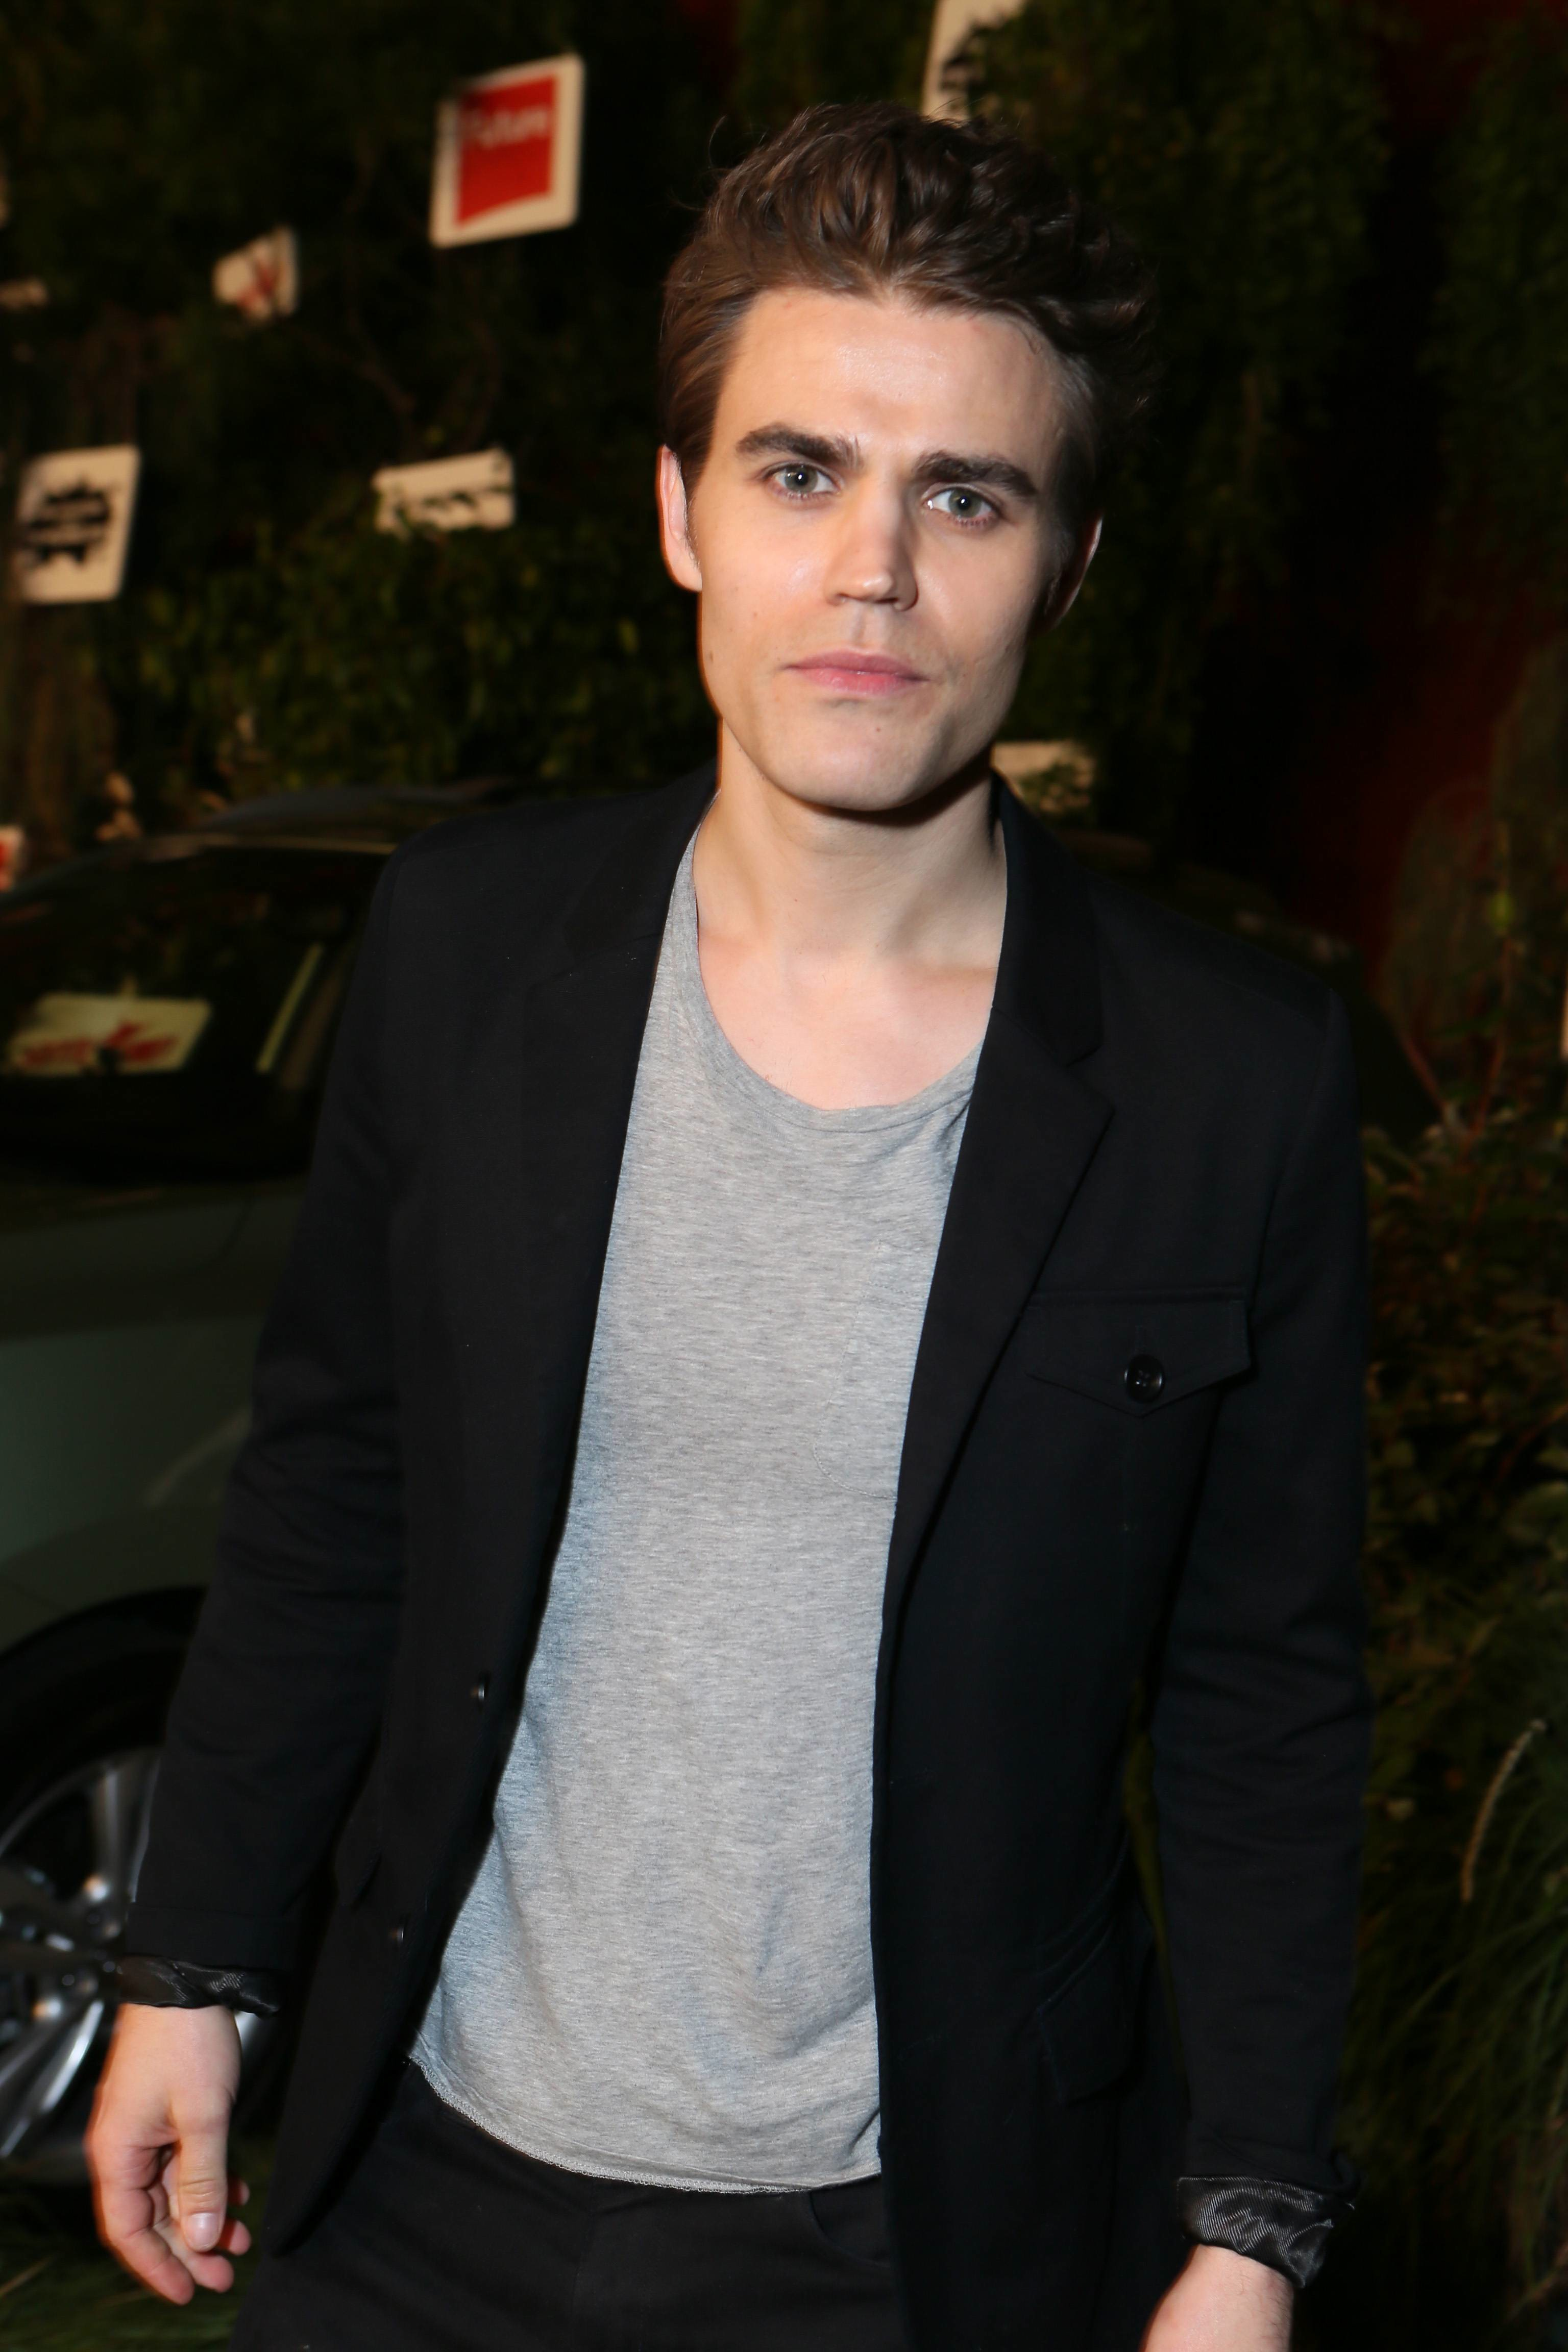 Paul Wesley attends Hyundai and Skybound's 'The Walking Dead' 10th Anniversary Celebration Event, on Friday, July 19, 2013 in San Diego, Calif. (Photo by Alexandra Wyman/Invision for Full Picture/AP Images)